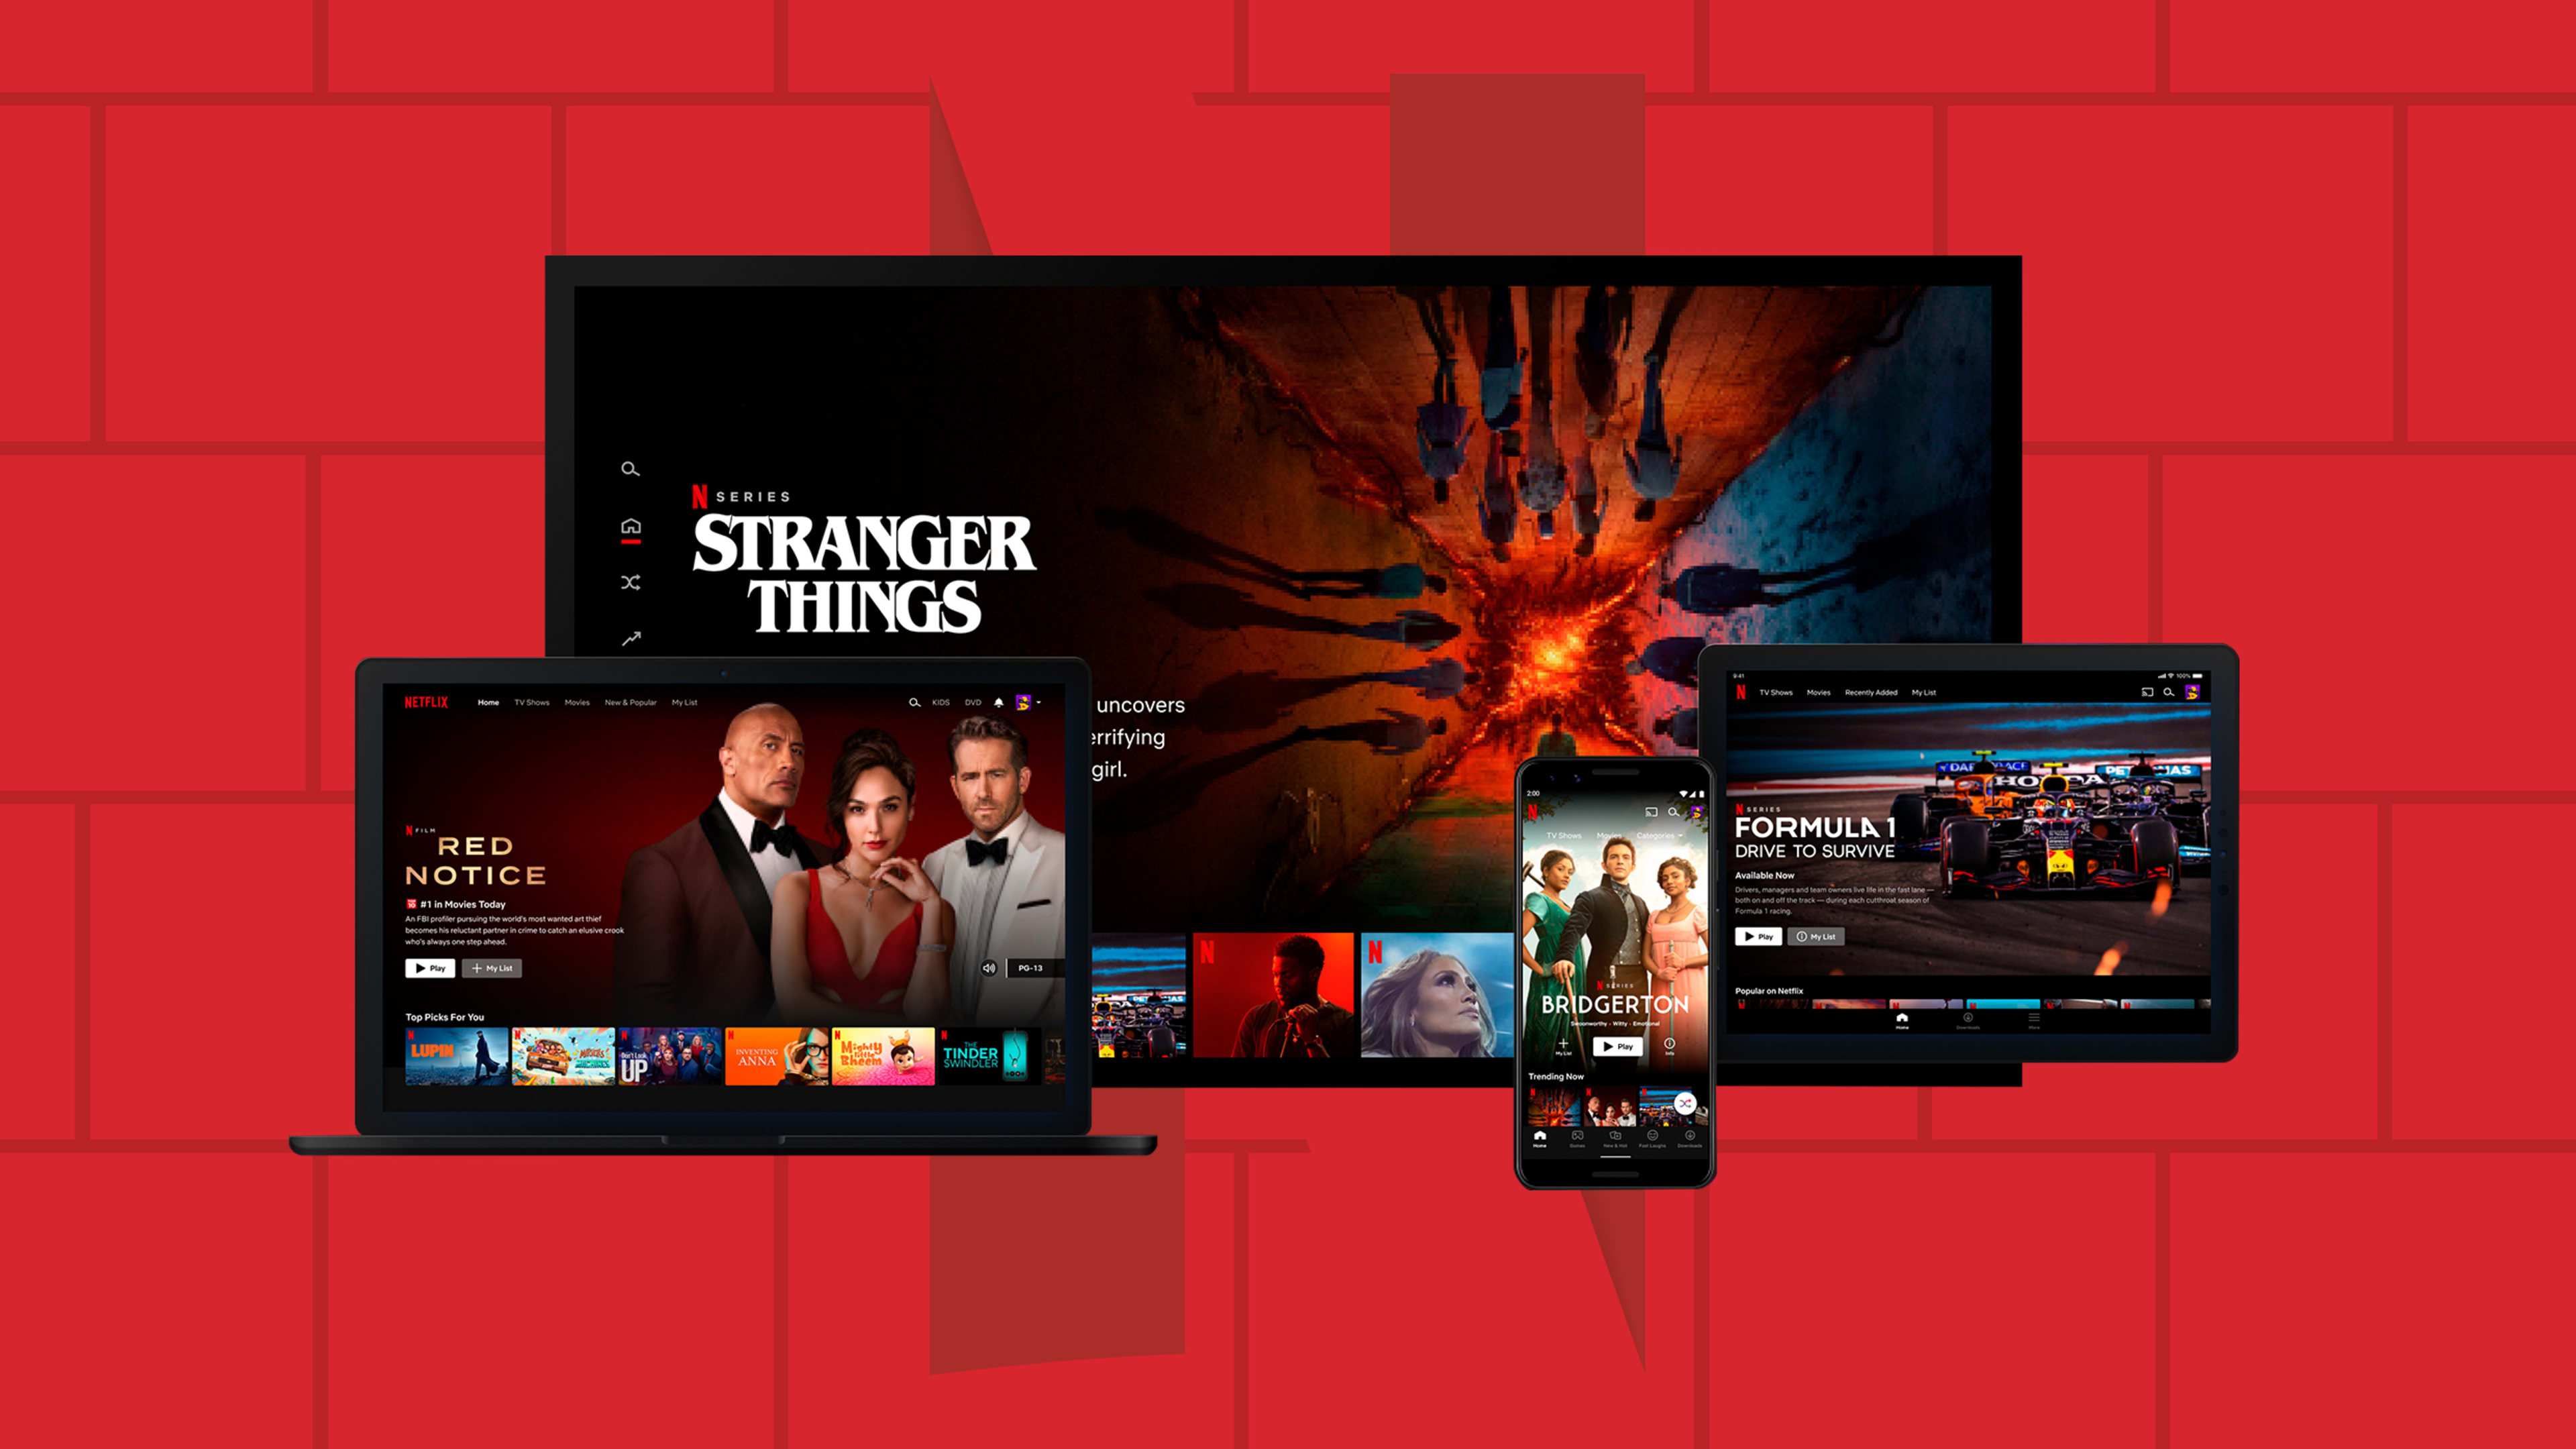 Netflix’s head of design answers every question you ever had about Netflix